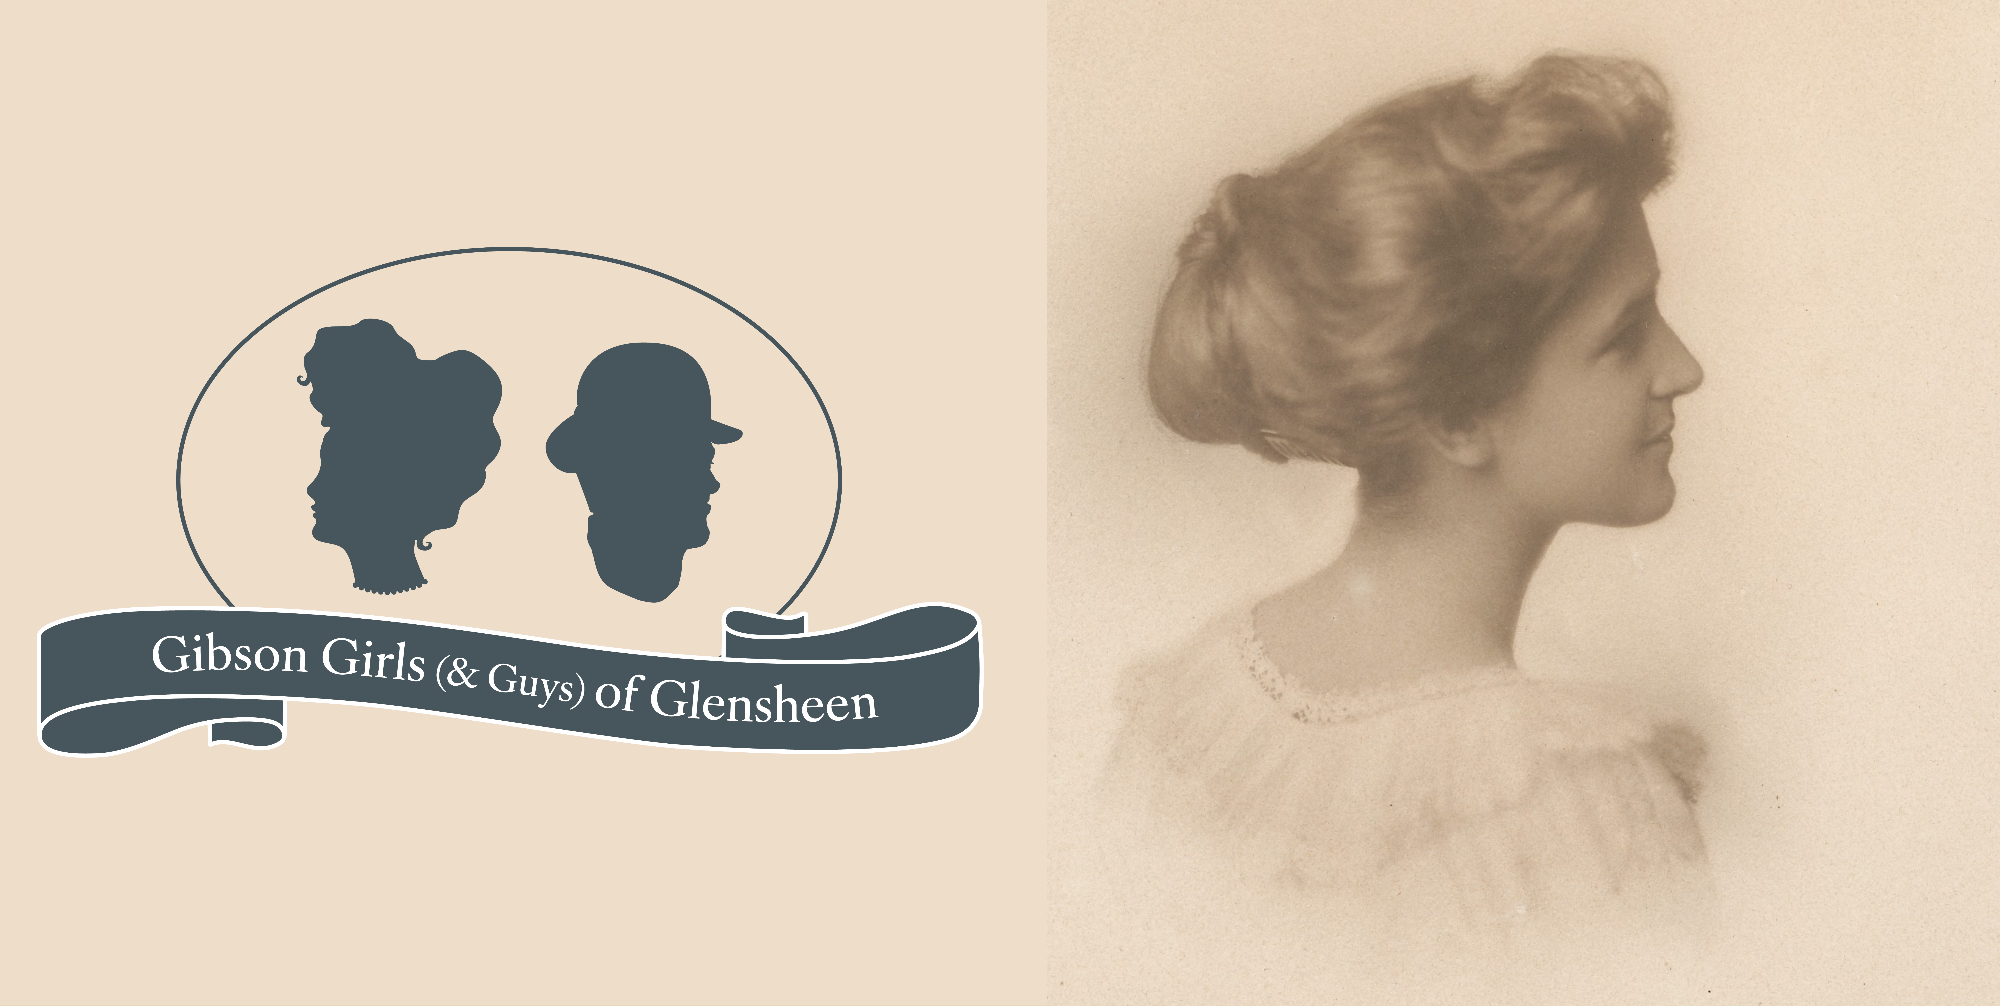 A portrait of a woman with large curly hair and a white dress on in silhouette. Next to it, a logo featuring a woman with large hair facing left and a man with a bowler hat facing right. Text says Gibson Girls & Guys of Glensheen.